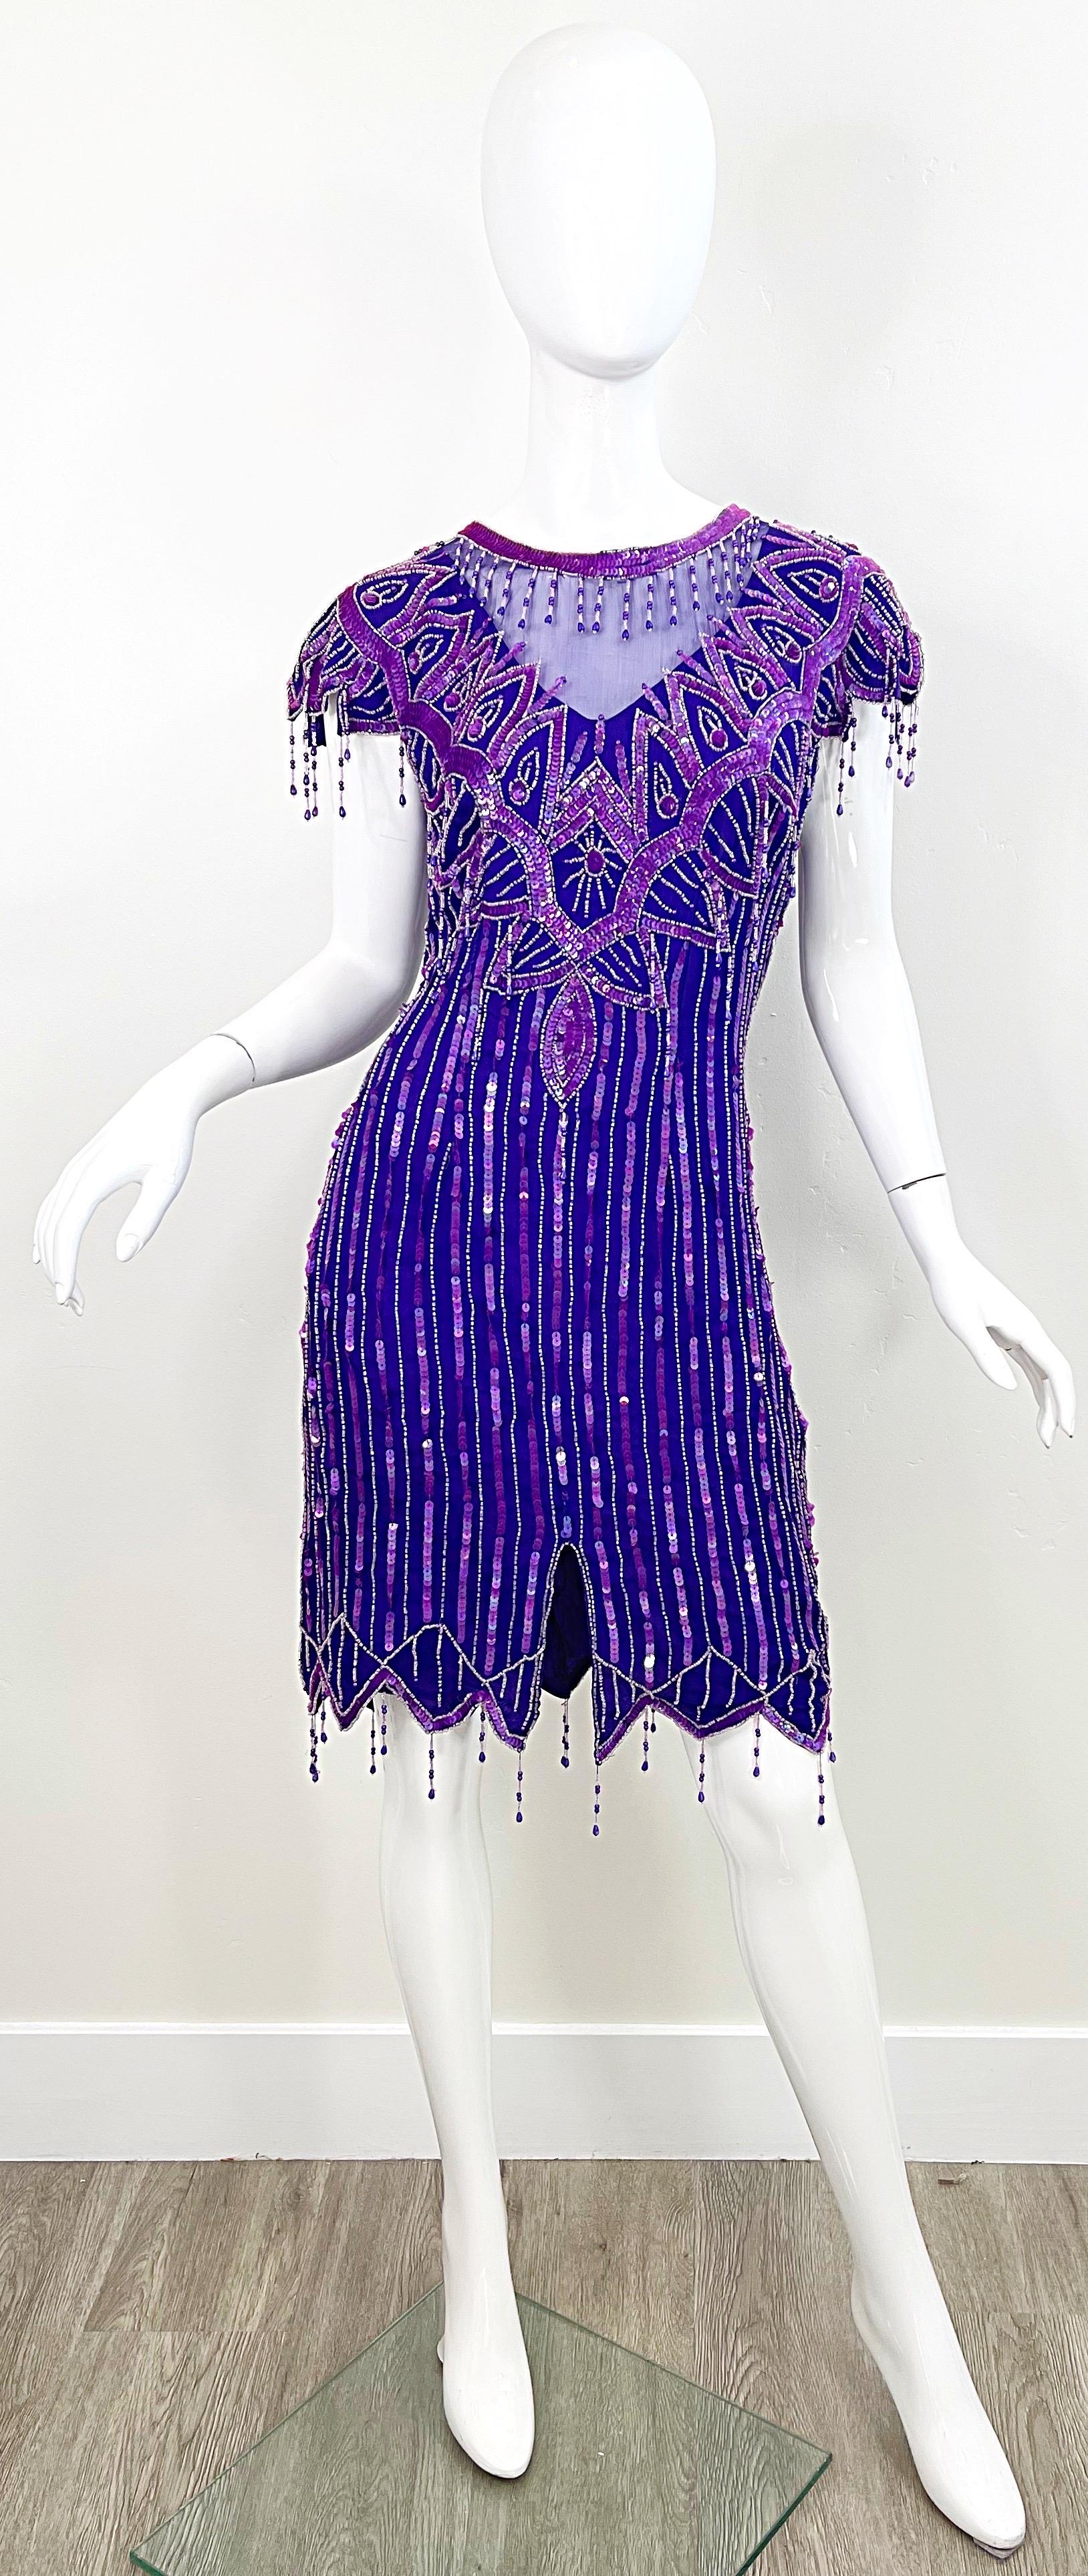 Amazing 1980s purple silk chiffon beaded and sequined flapper style cocktail dress ! Features thousands of hand-sewn sequins and beads throughout. Sheer chiffon bellow the neck. Hidden zipper up the back with hook-and-eye closure. Very well made